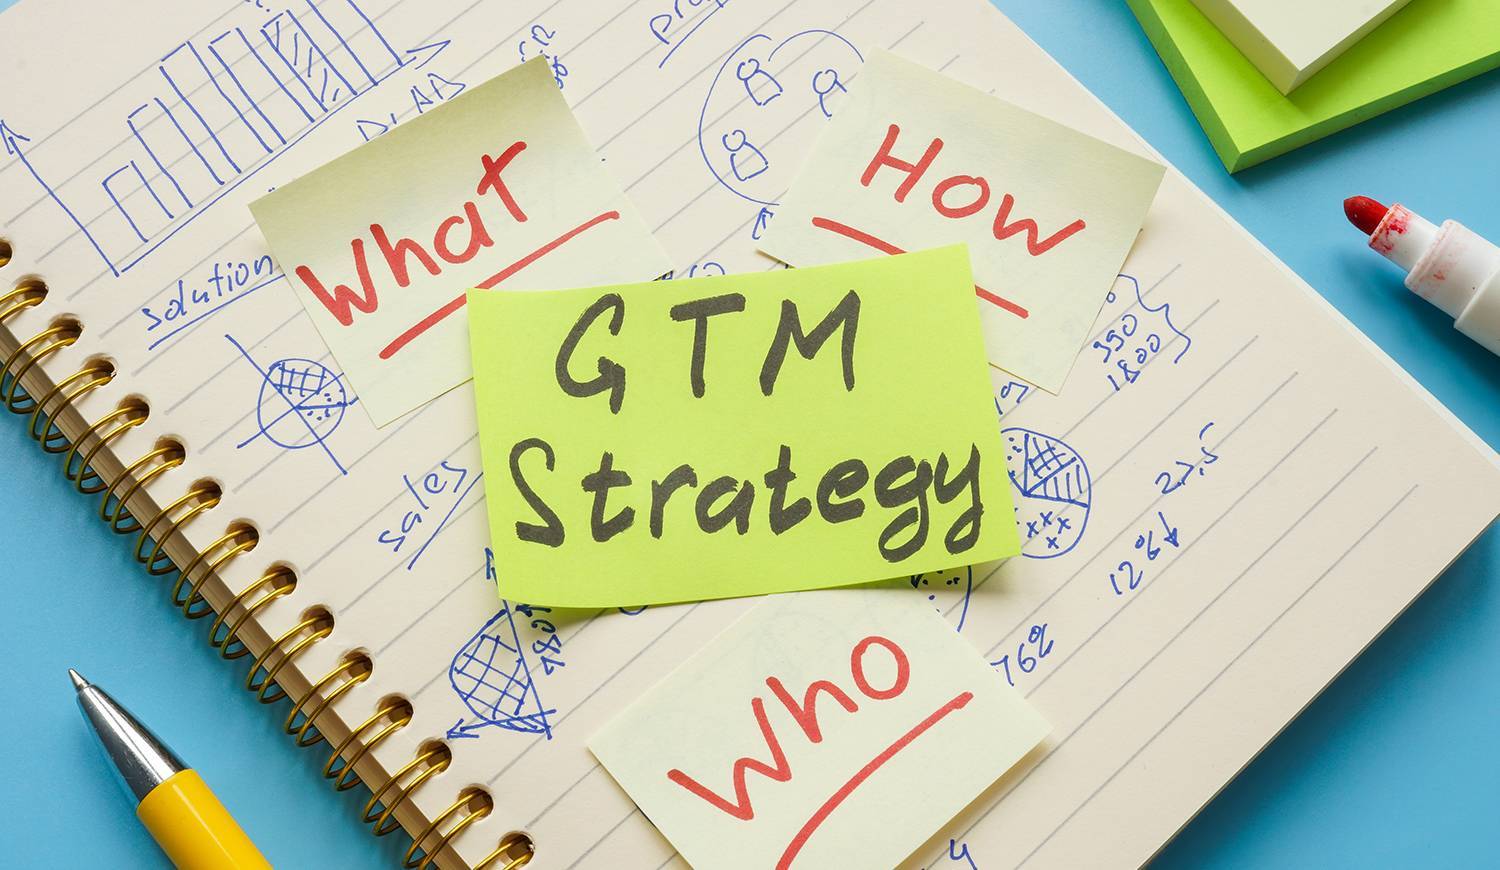 Photograph of notebook with sticky notes with the words GTM Strategy, How, What, and Who written on them